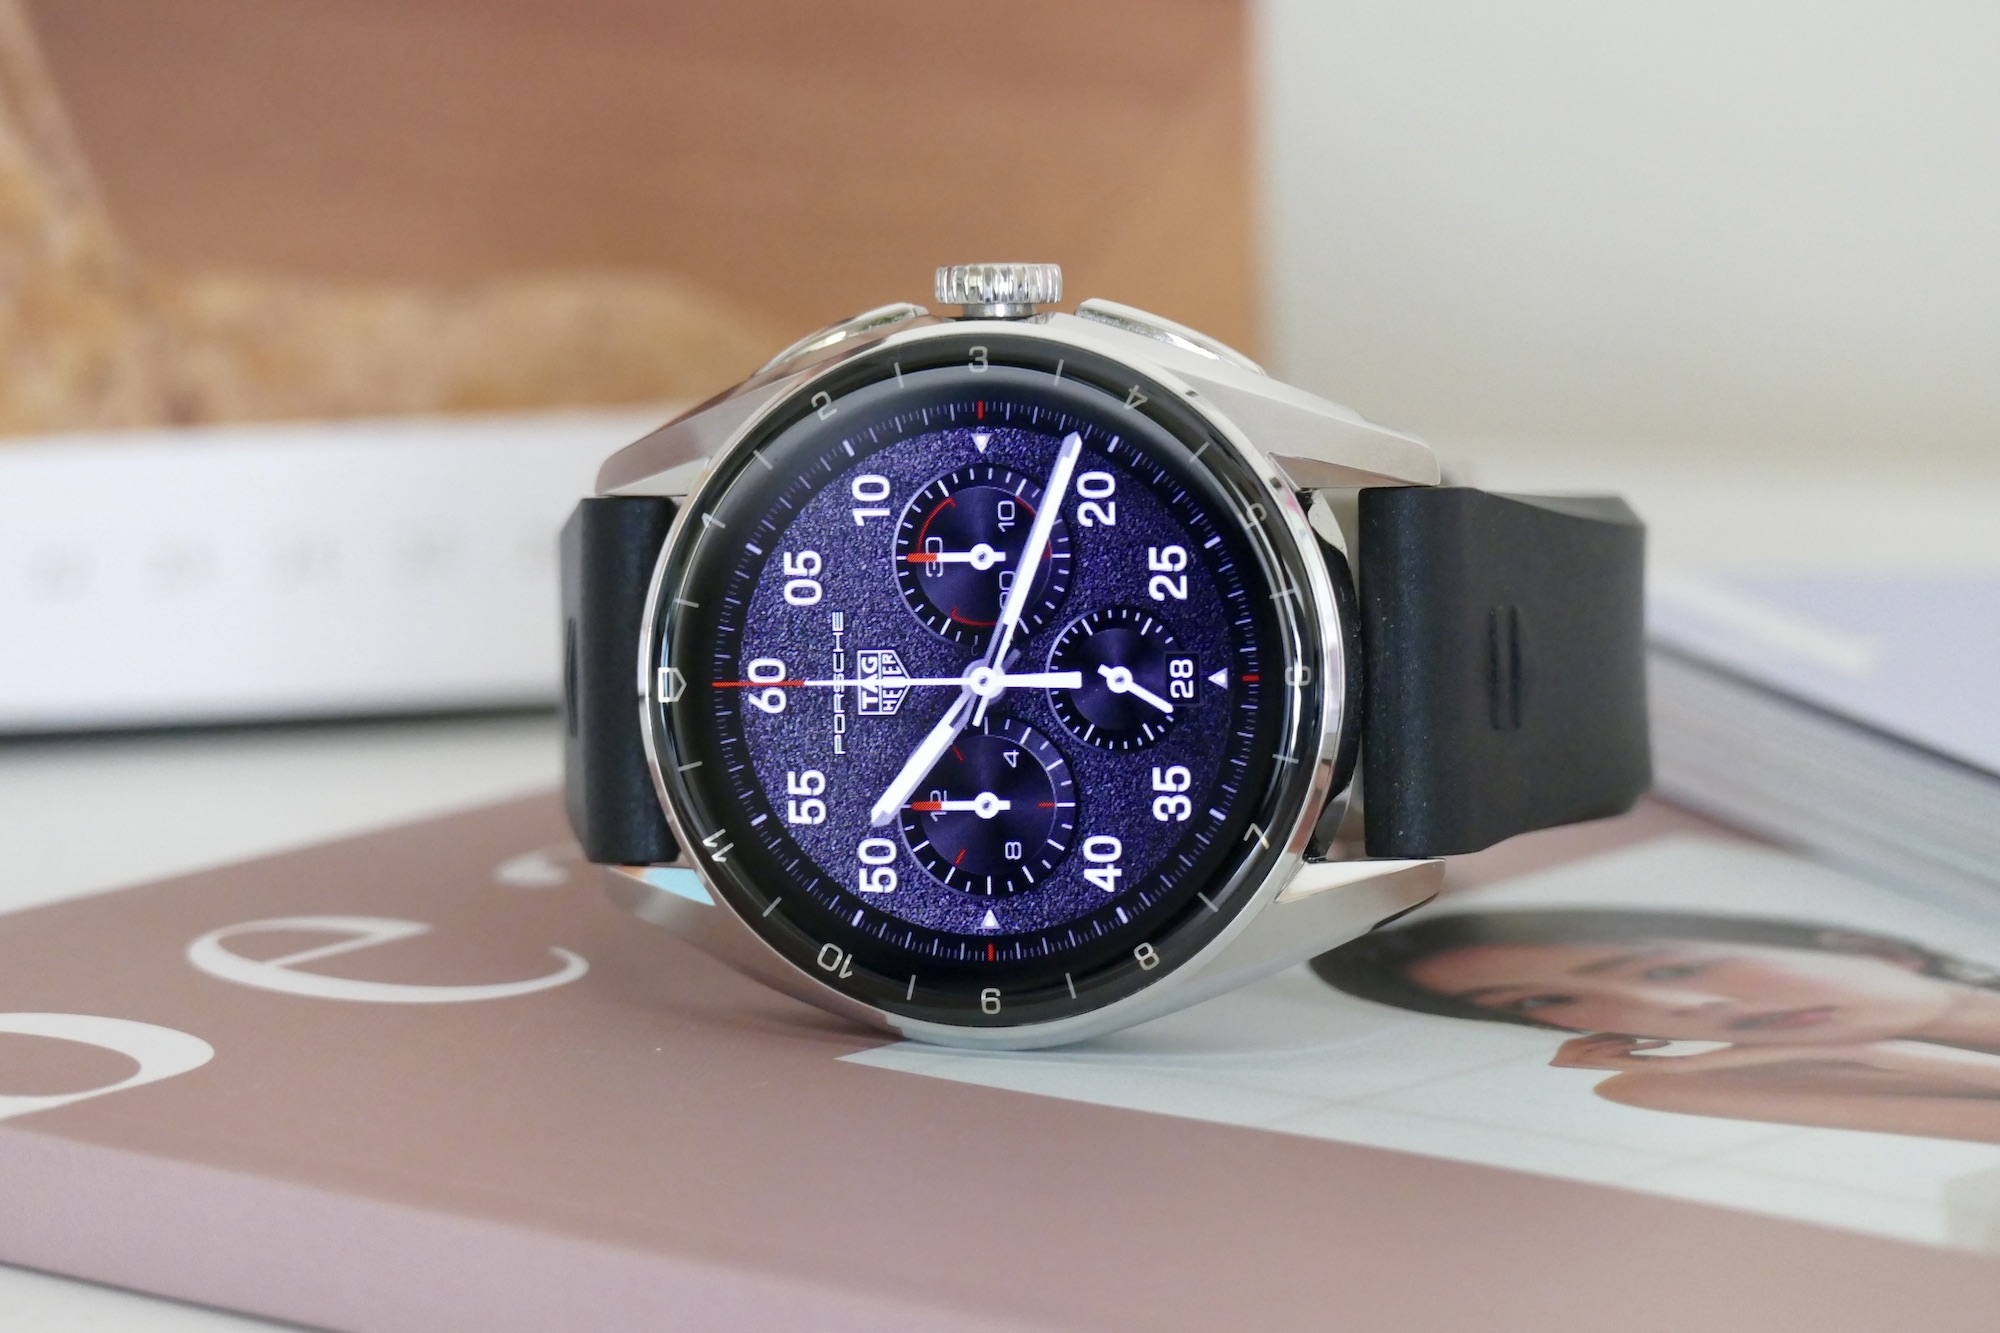 Montblanc's $1,300 Wear OS smartwatch isn't all that smart (yet)